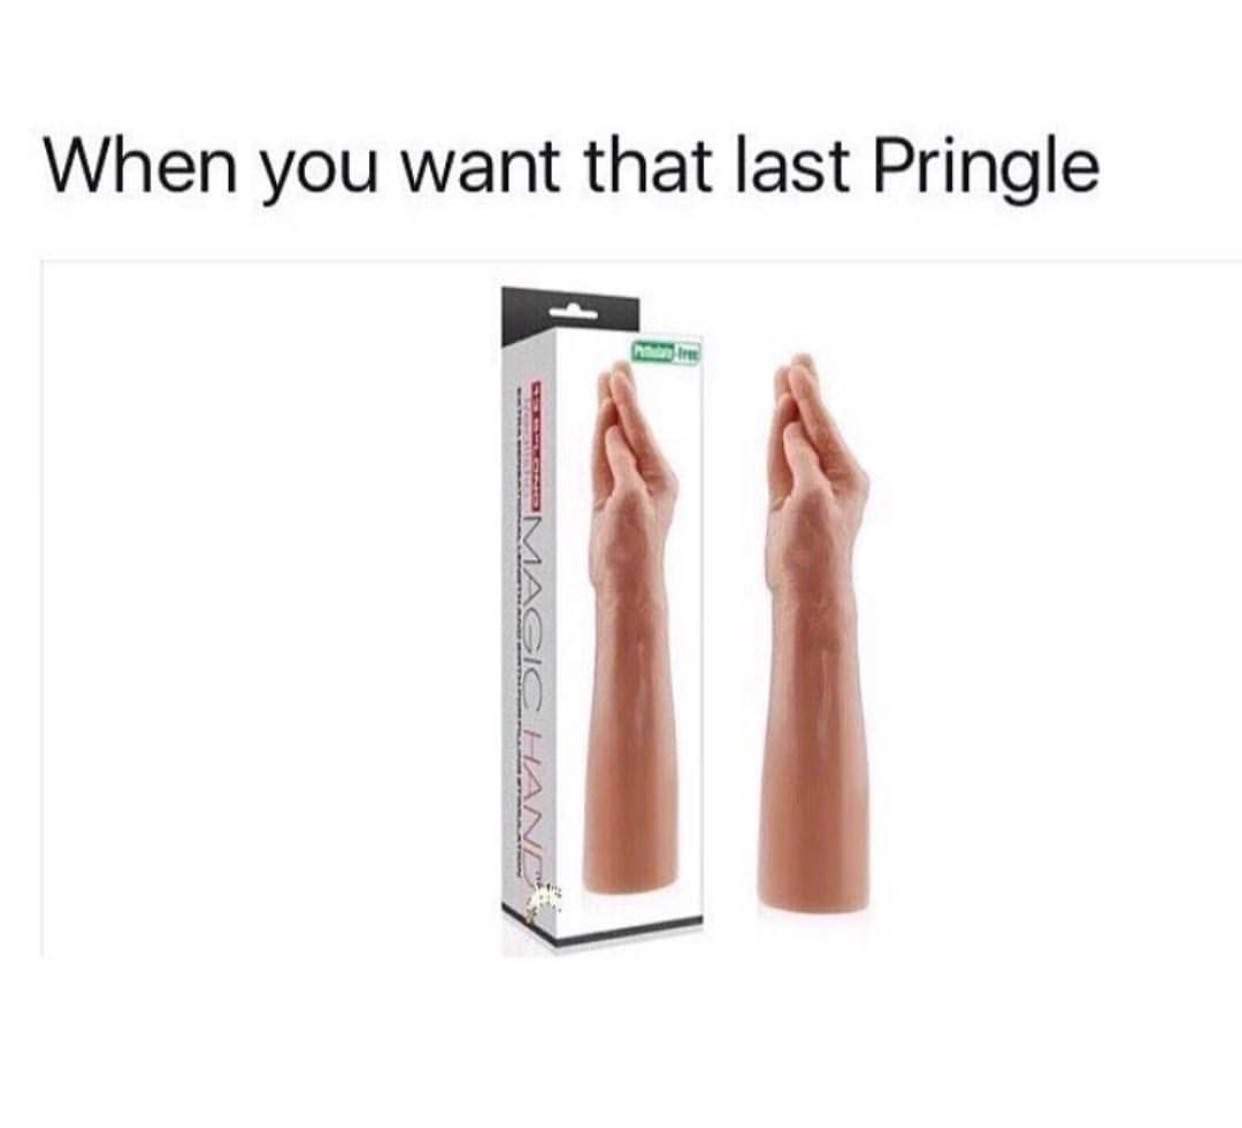 you want the last pringle - When you want that last Pringle Magic Handy